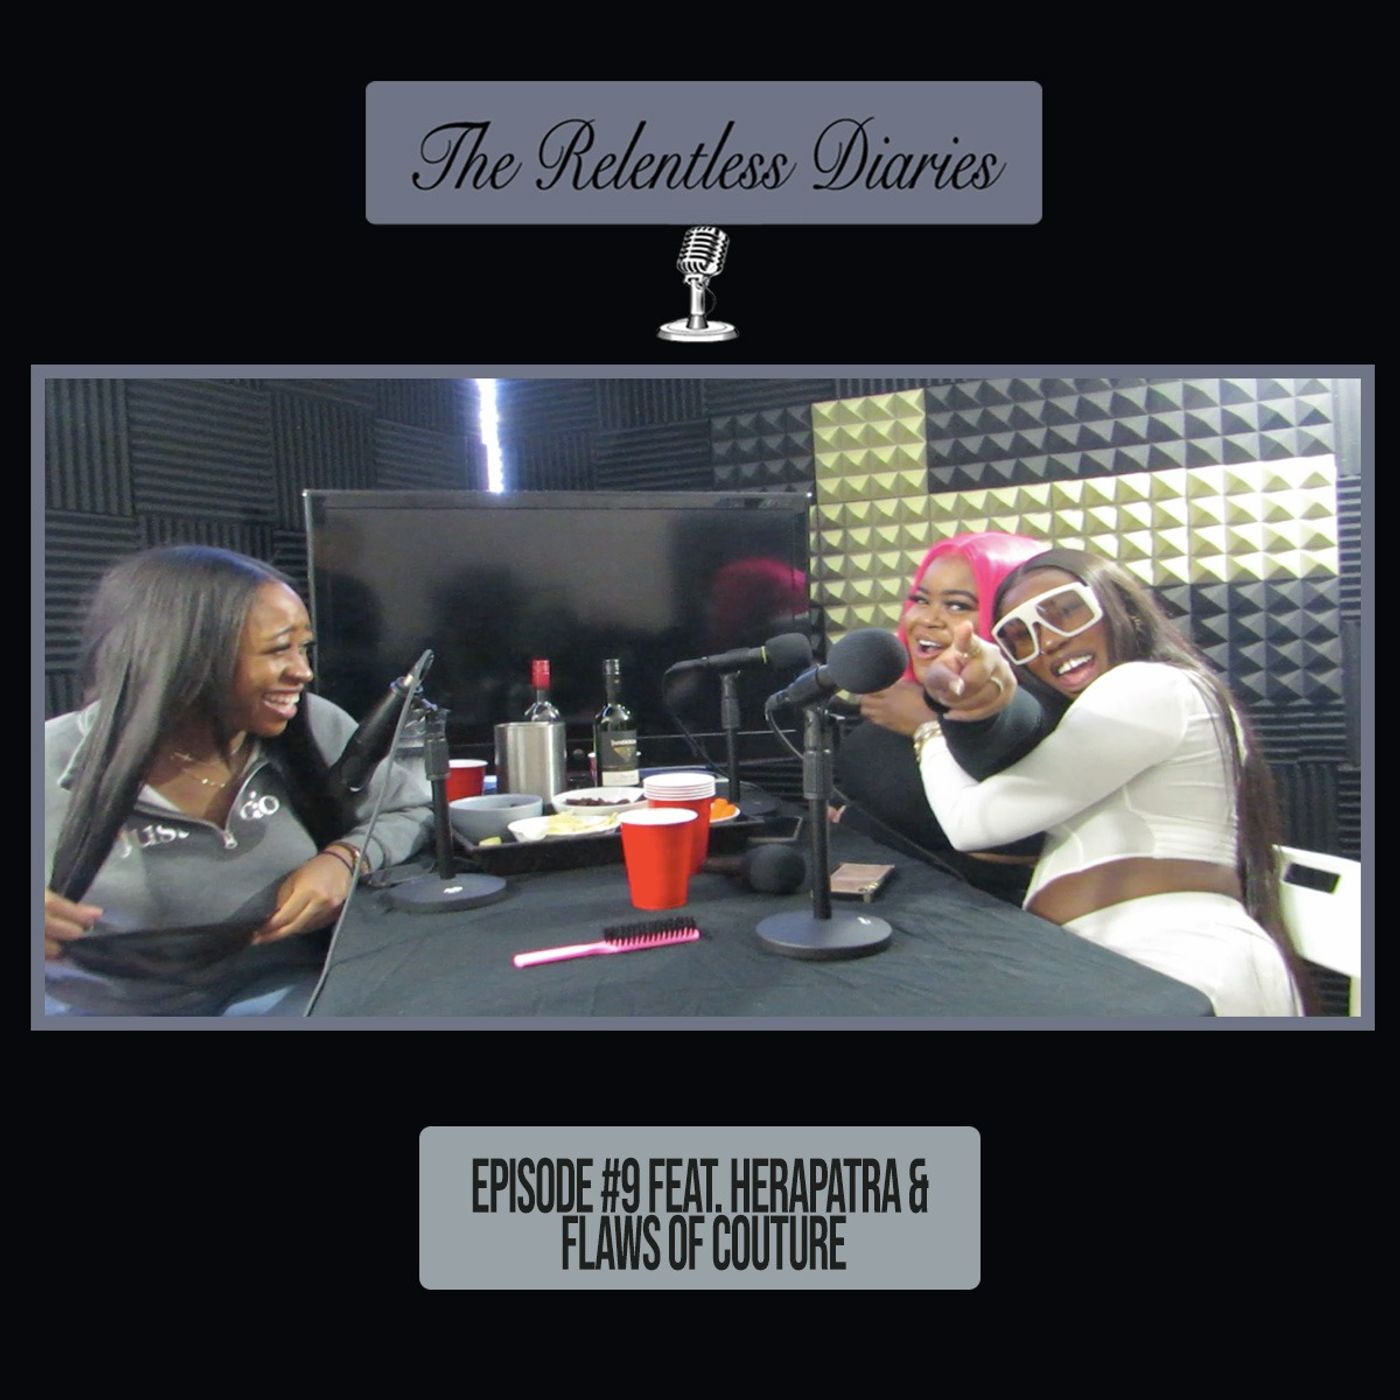 The Relentless Diaries, Episode 9: ”Black Women Are Bad. We Created Bad” Featuring Herapatra and Flaws Of Couture